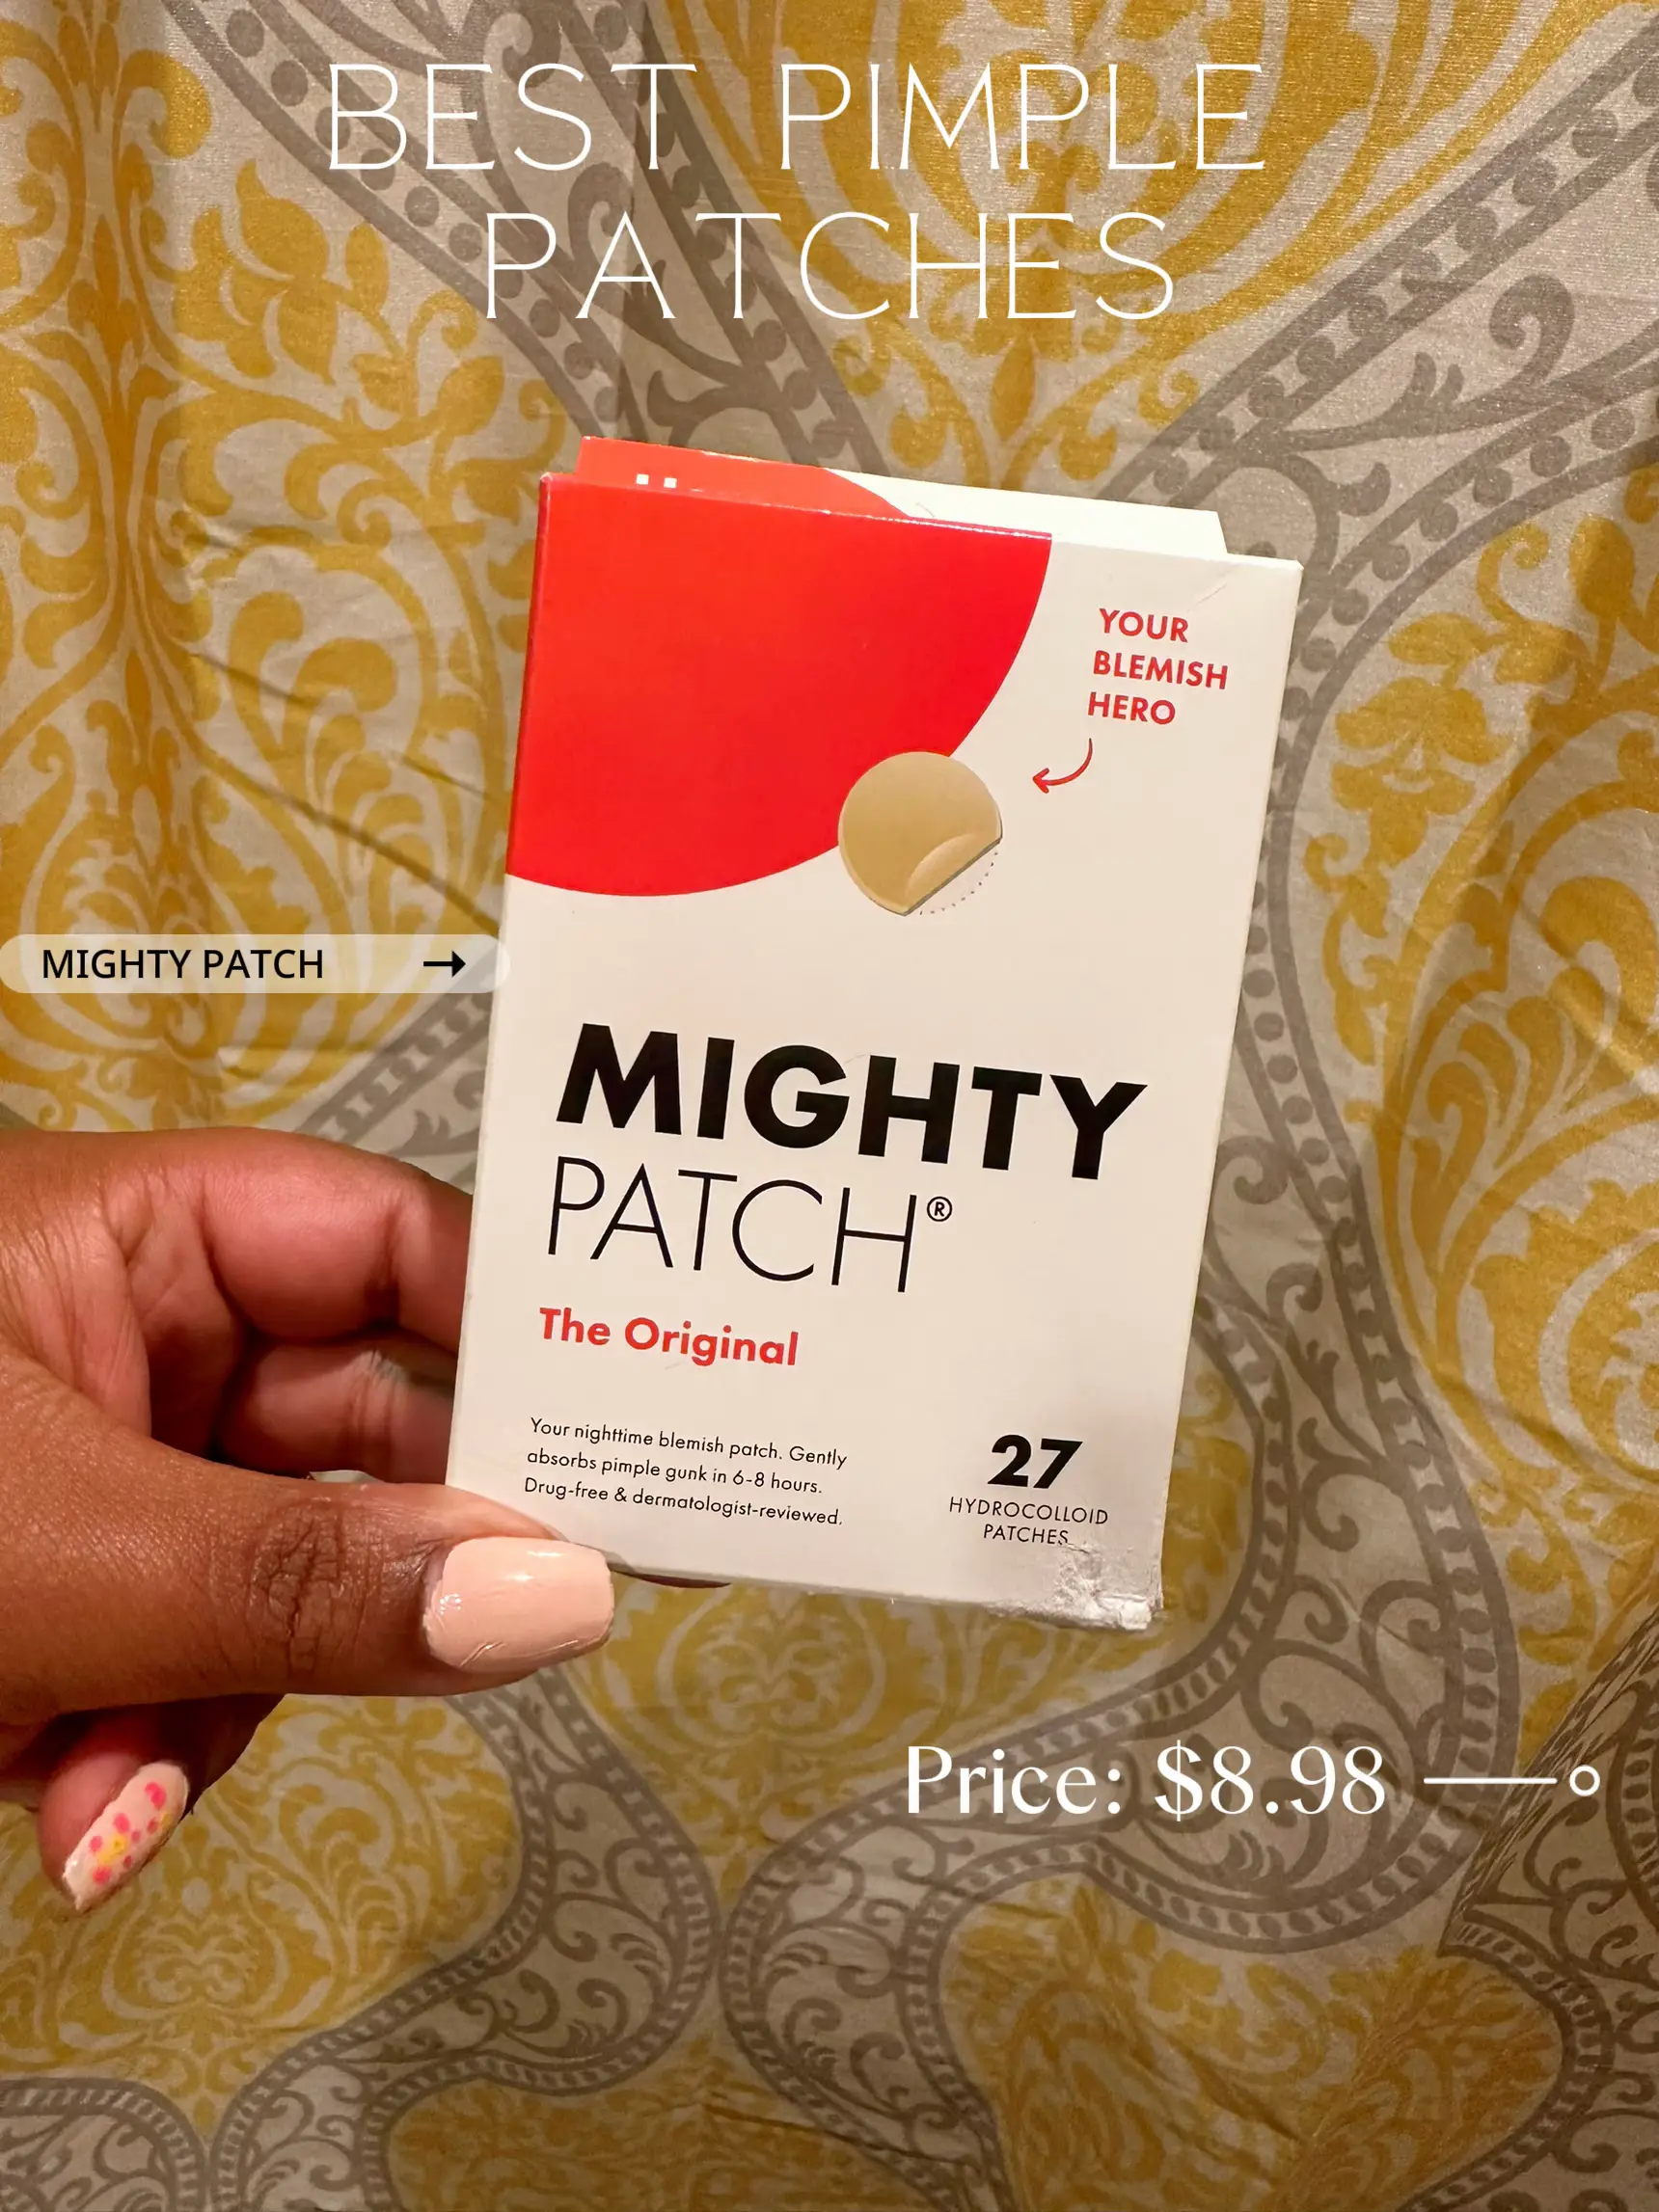 BEST PIMPLE PATCHES, Gallery posted by Taylor Seay